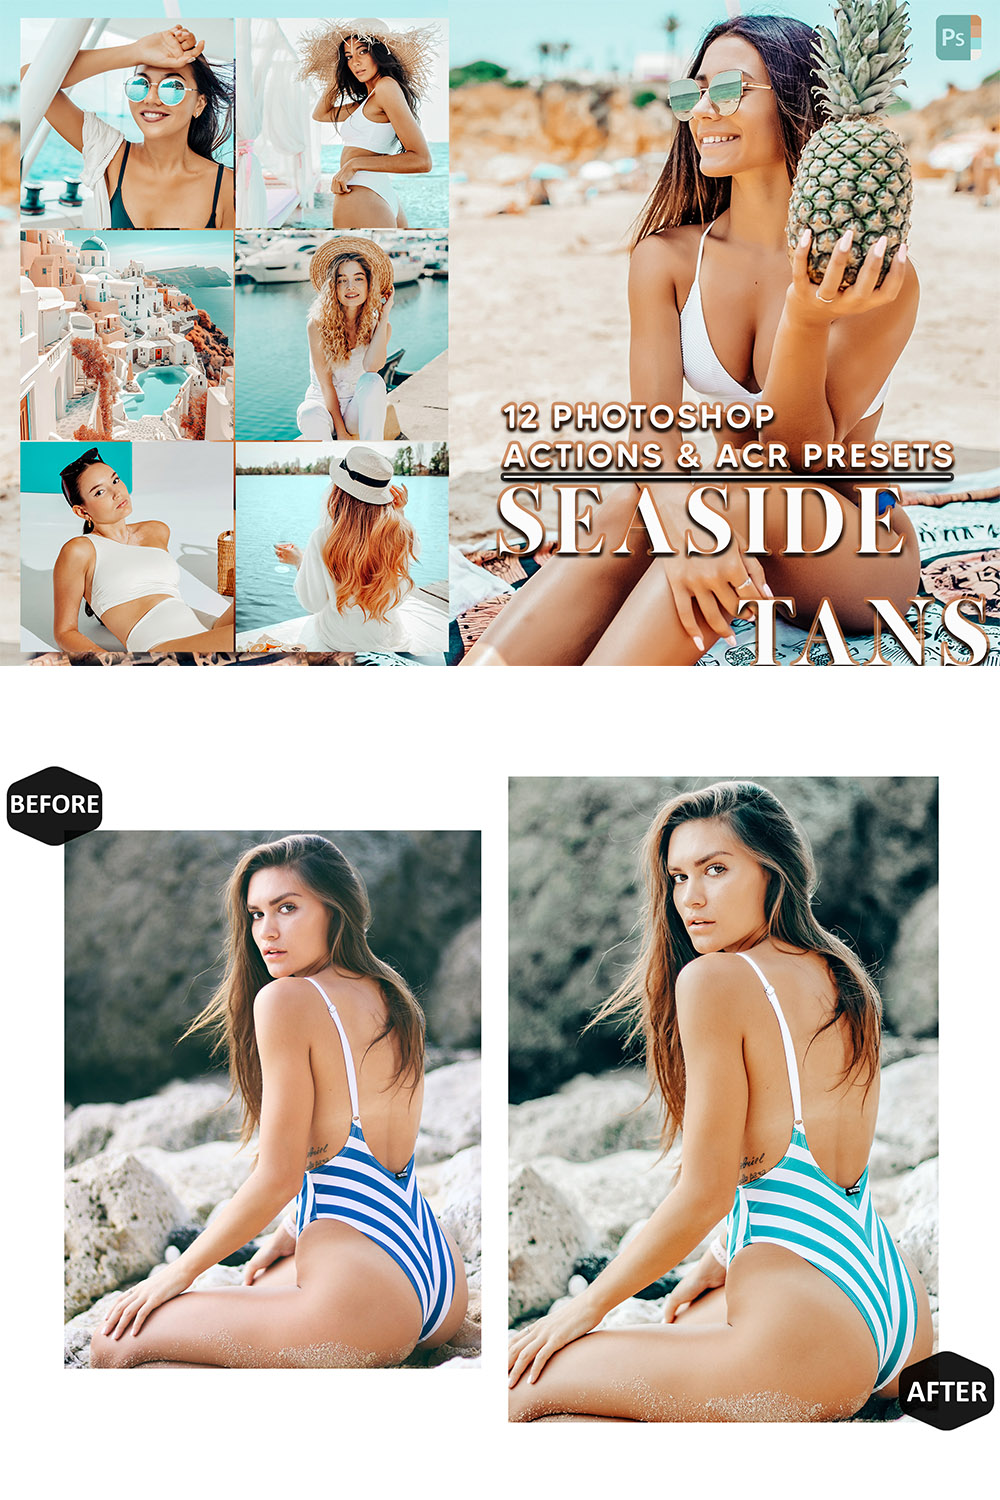 12 Photoshop Actions, Seaside Tans Ps Action, Bright Summer ACR Preset, Beach Ps Filter, Atn Portrait And Lifestyle Theme For Instagram, Blogger pinterest preview image.